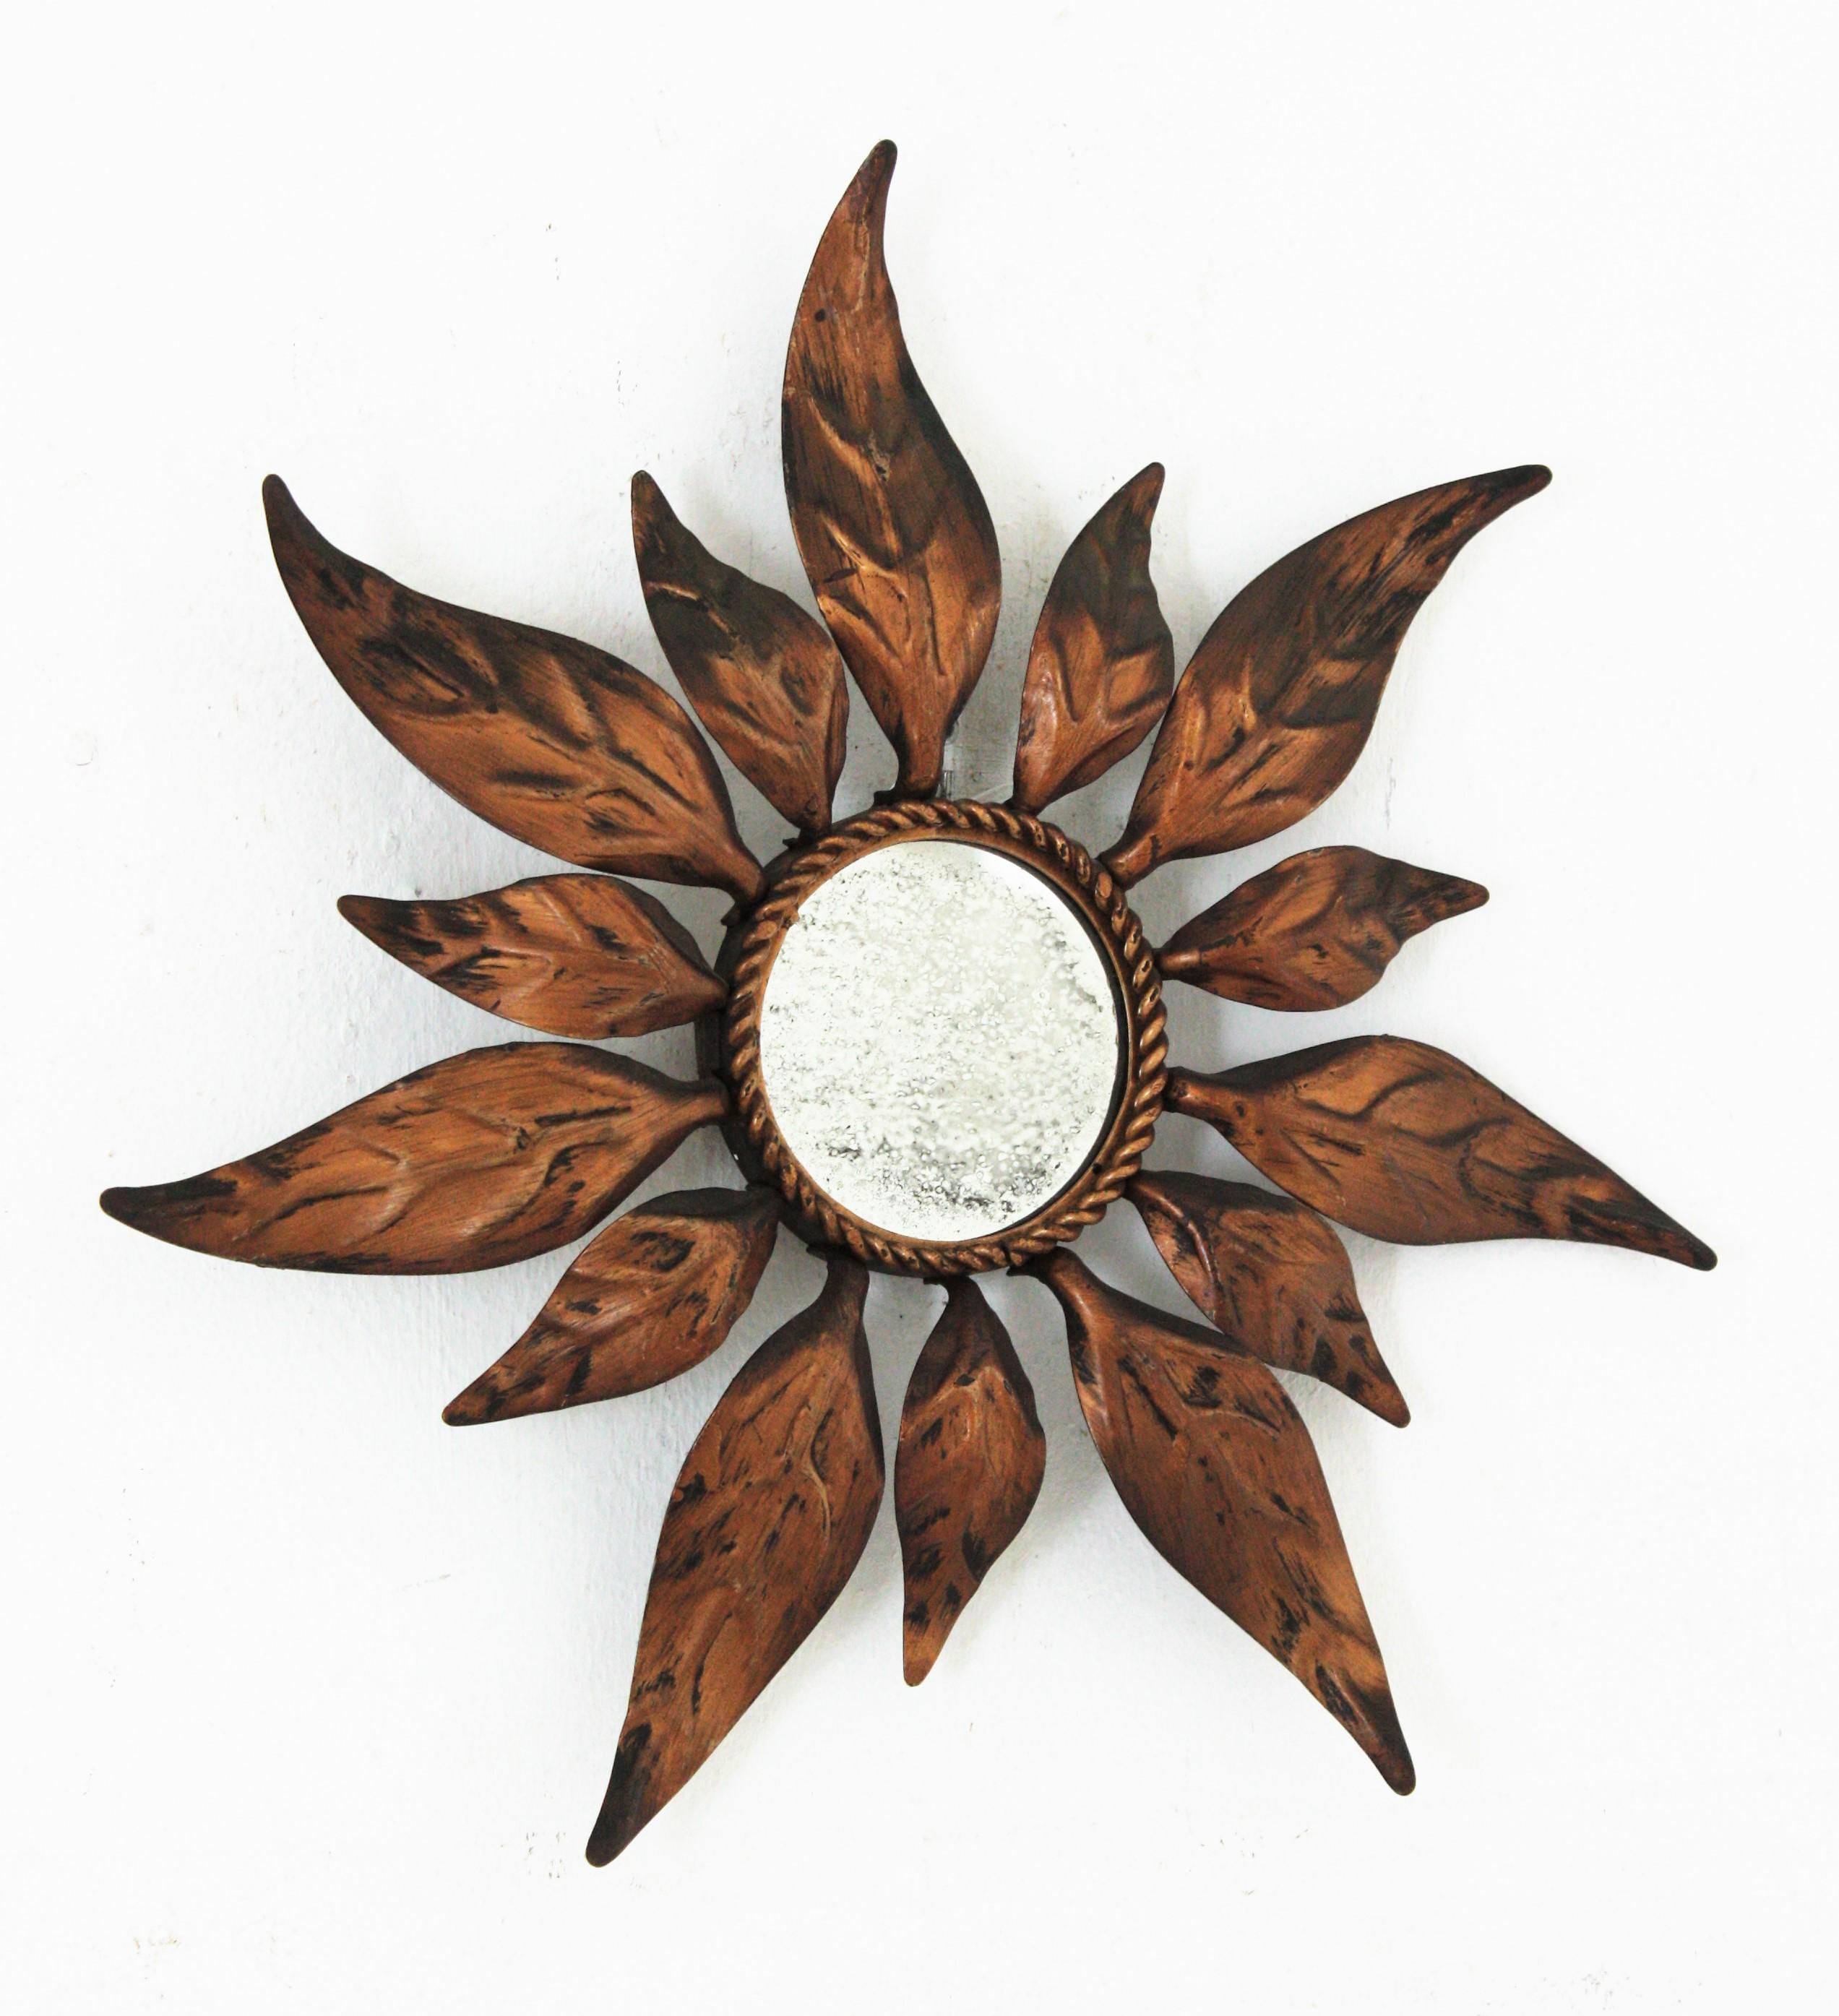 Sunburst leafed mirror in gilt metal, Spain, 1950s
Lovely handcrafted bronze-gilt iron mini sunburst mirror with alternating leaves in two sizes. Terrific aged patina and original mirror glass.
Unusual piece due to its small size. 
Beautiful